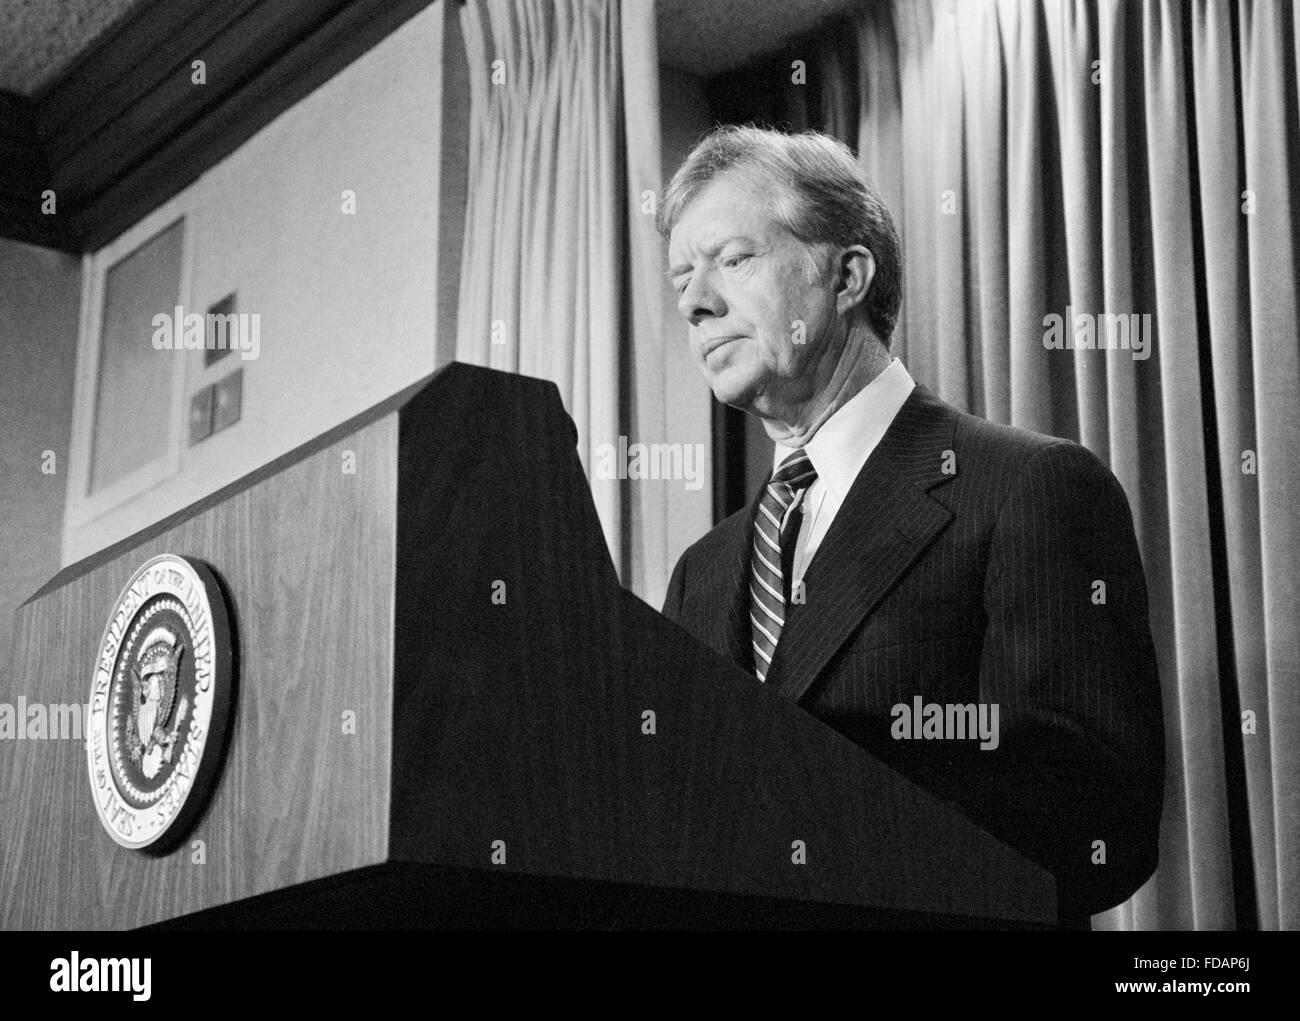 Jimmy Carter, 39th President of the USA, speaking to the press in April 1980 Stock Photo